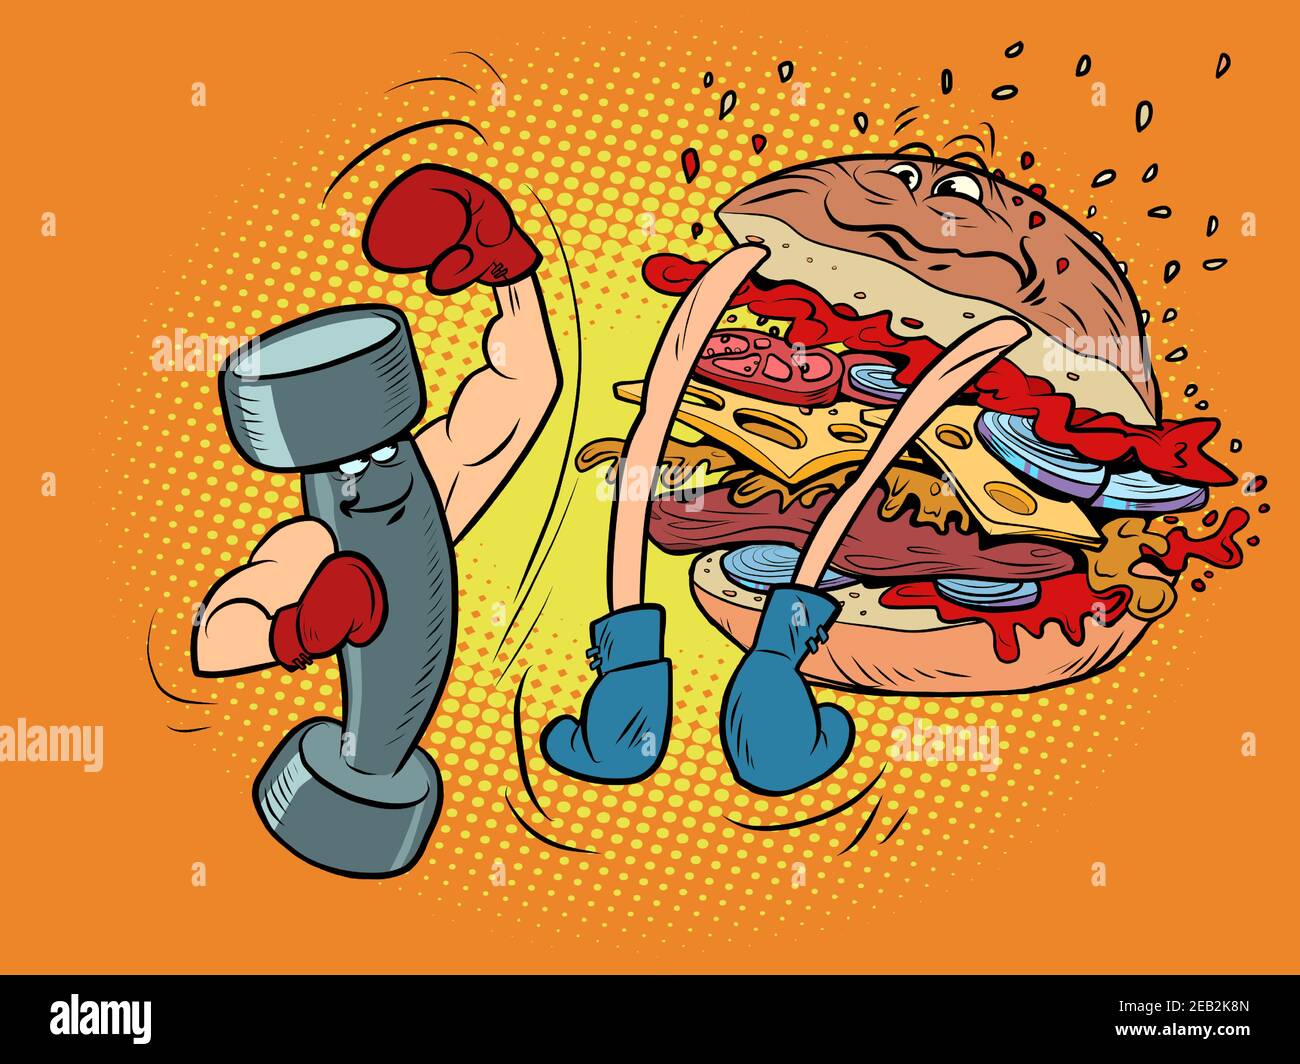 Dumbbell boxing against burger. Sports lifestyle versus harmful Stock Vector